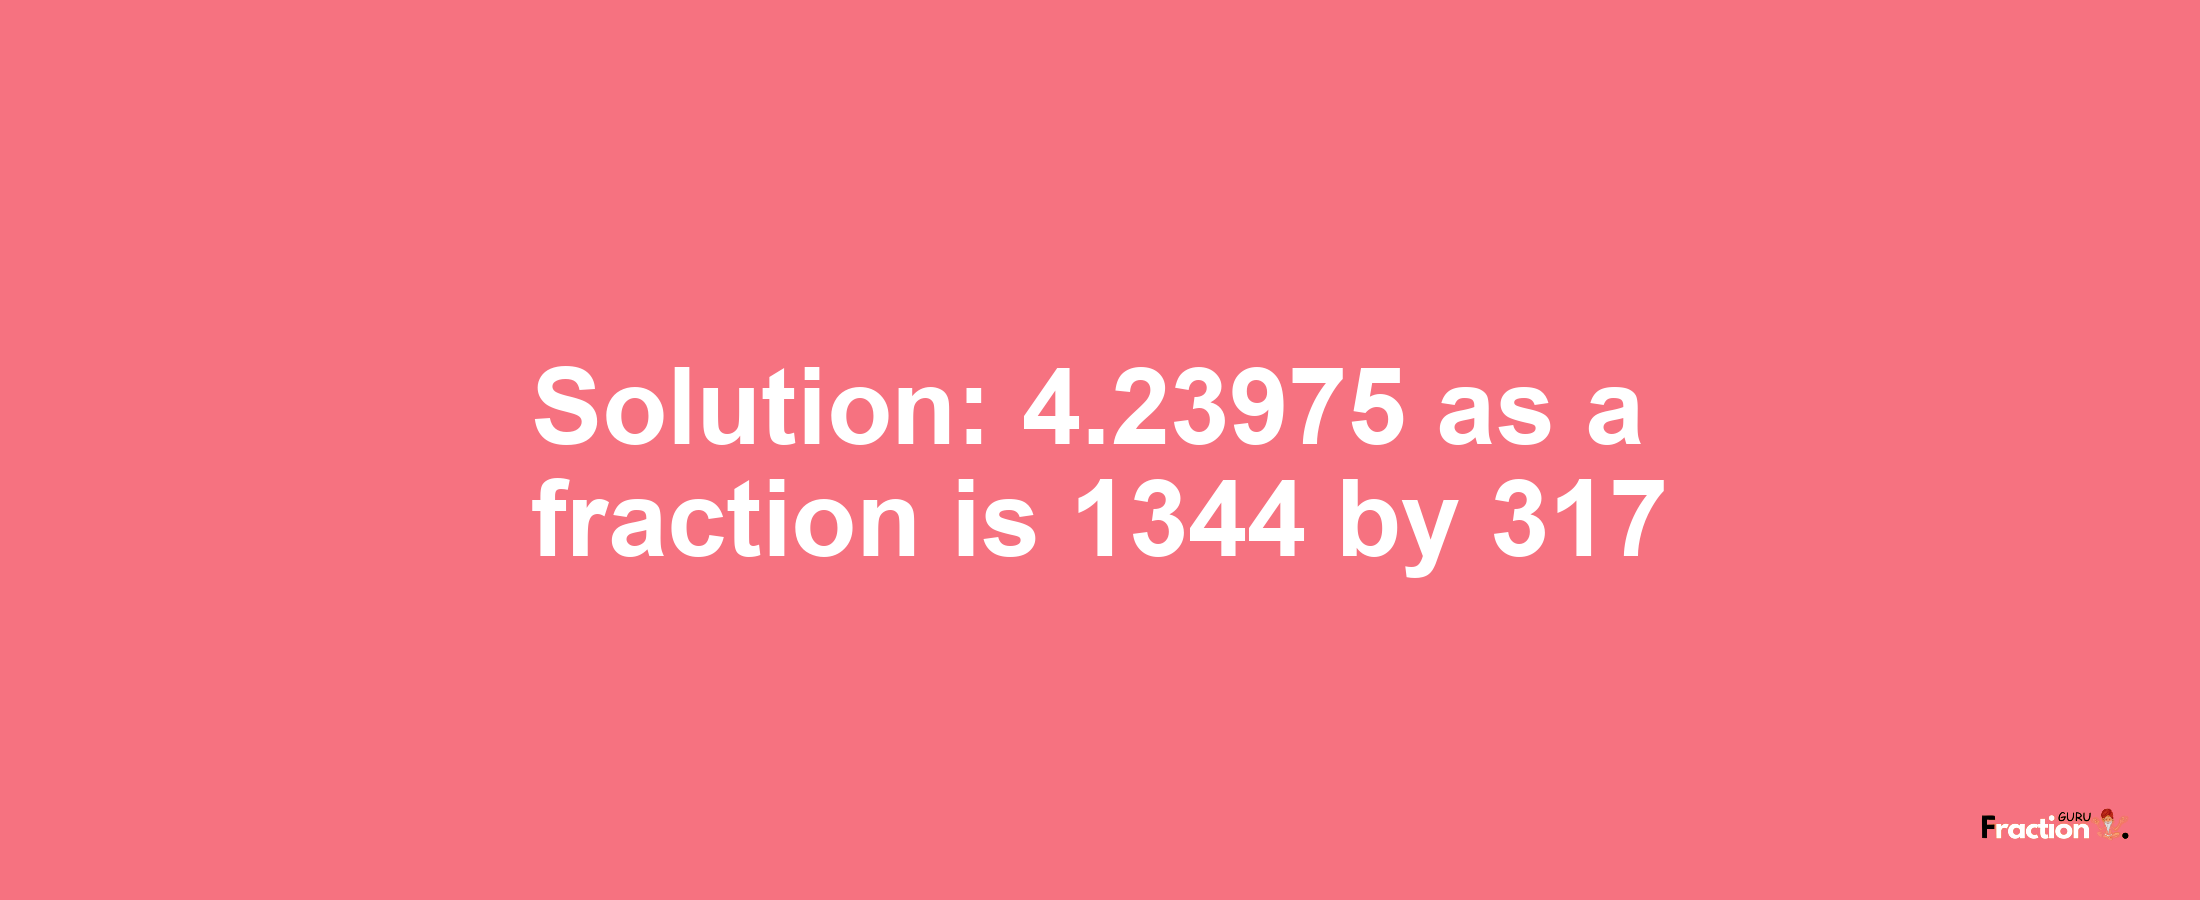 Solution:4.23975 as a fraction is 1344/317